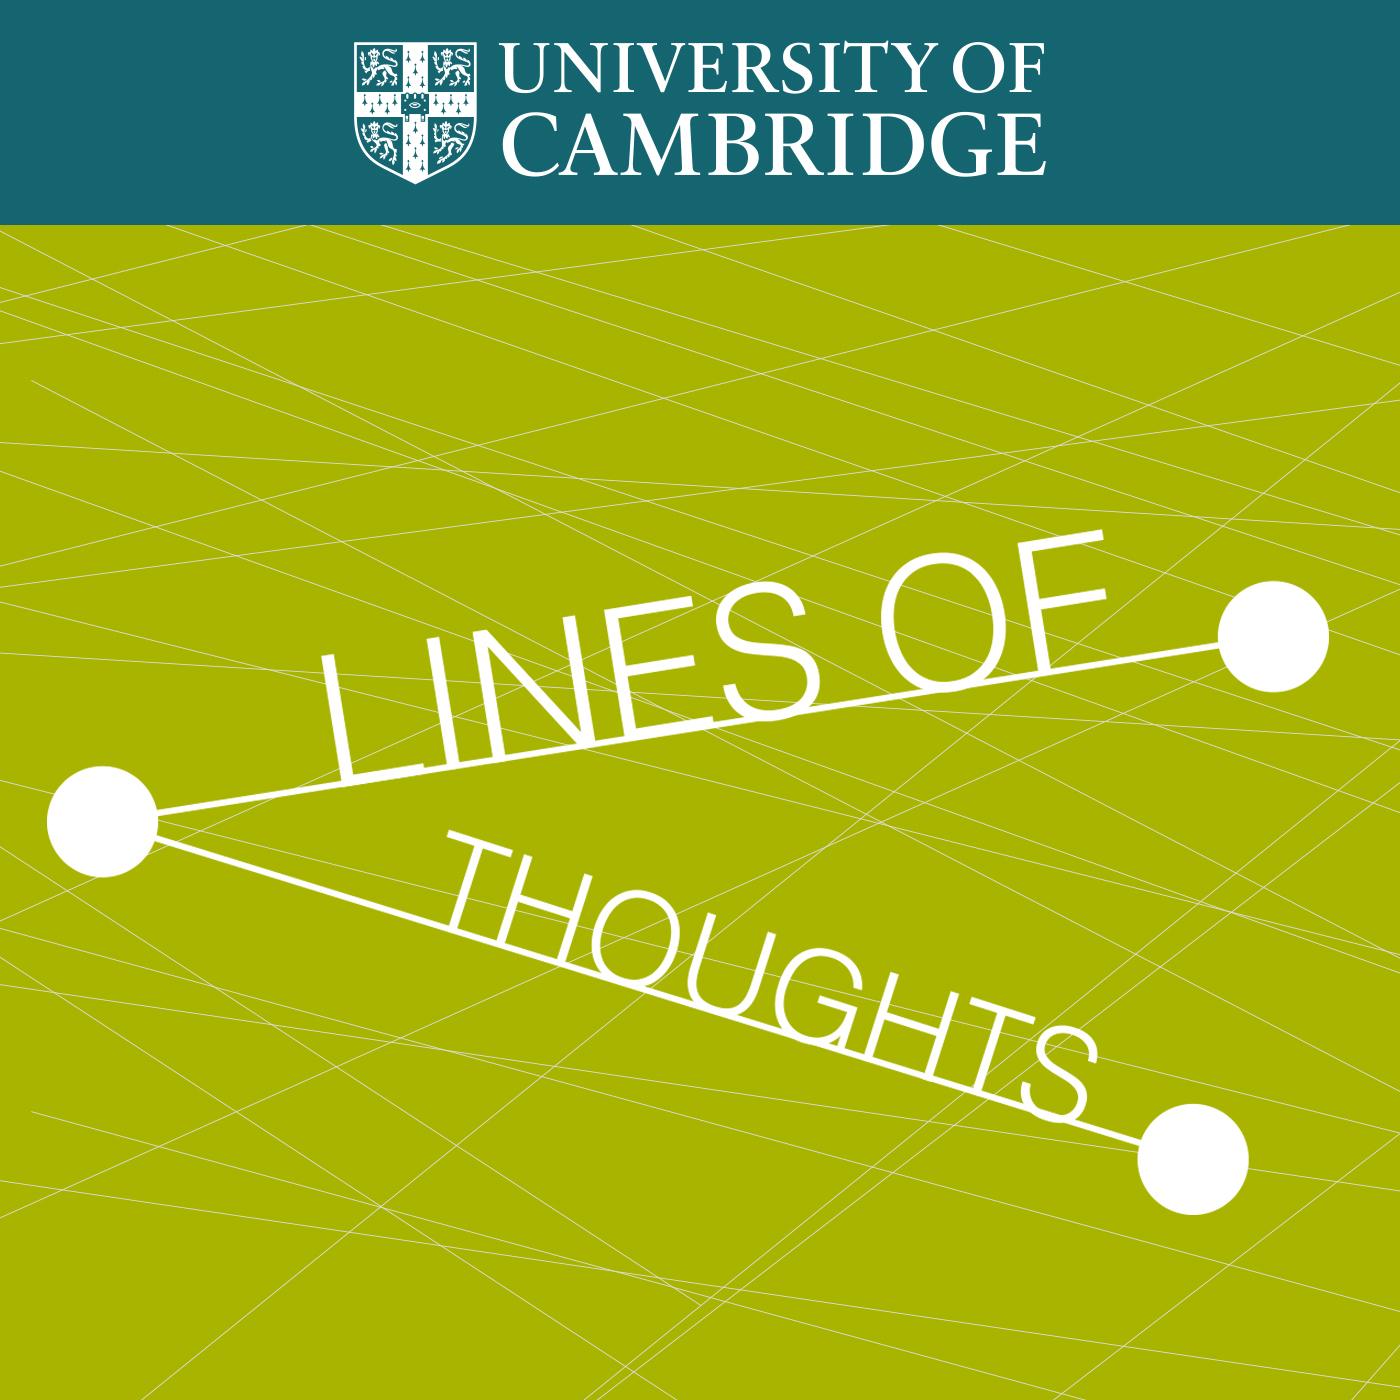 Lines of Thought: Revolutions in communications